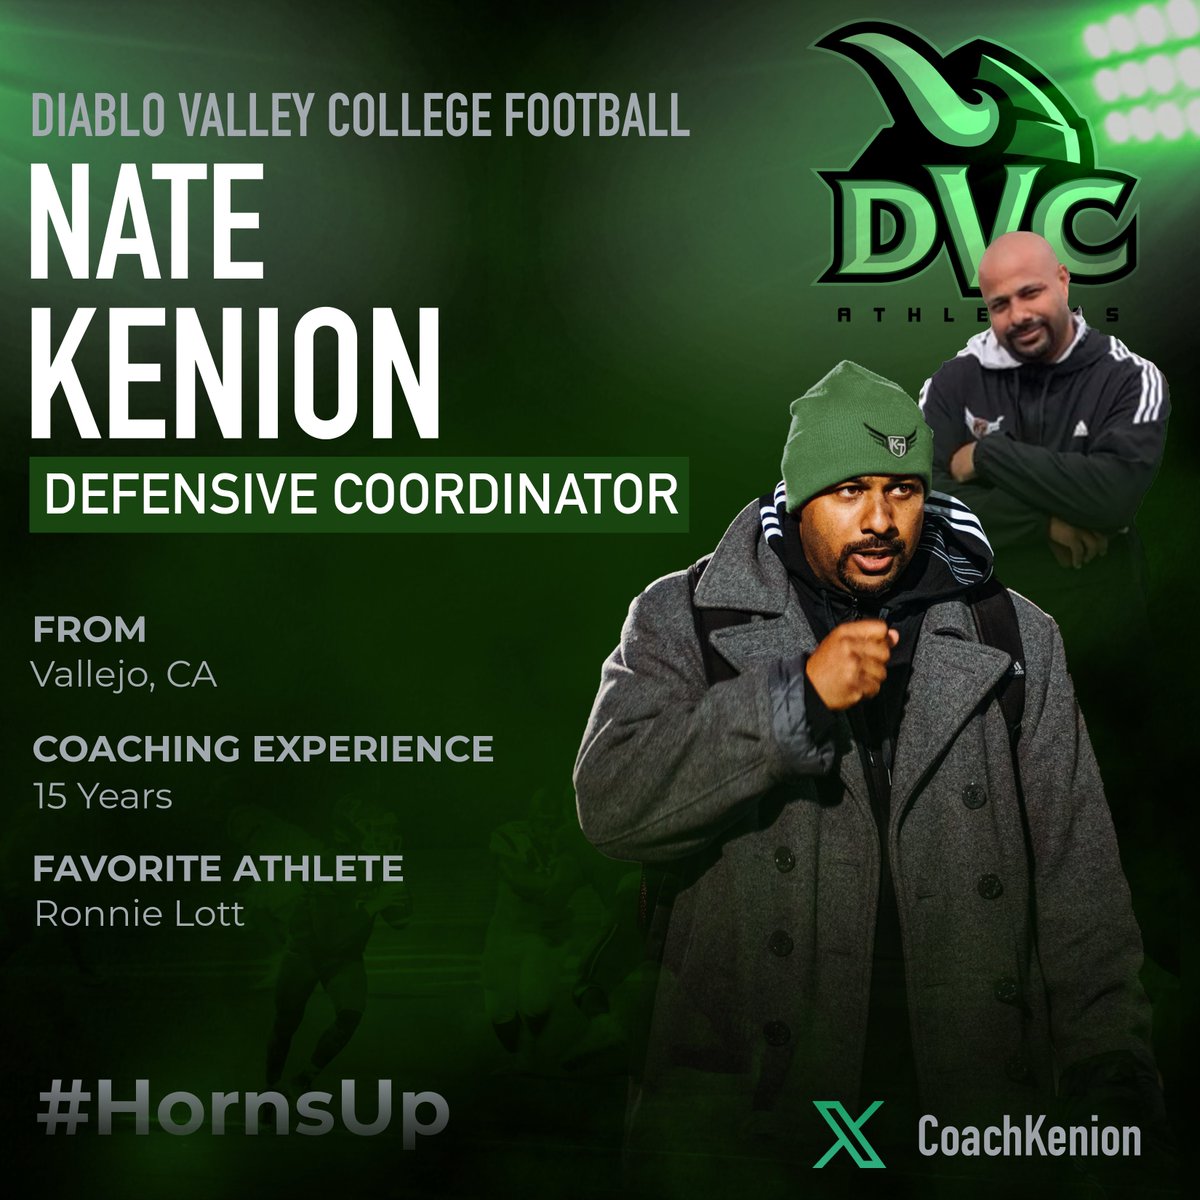 Nate Kenion (@CoachKenion) has been named the Defensive Coordinator for your DVC Vikings. #HornsUp